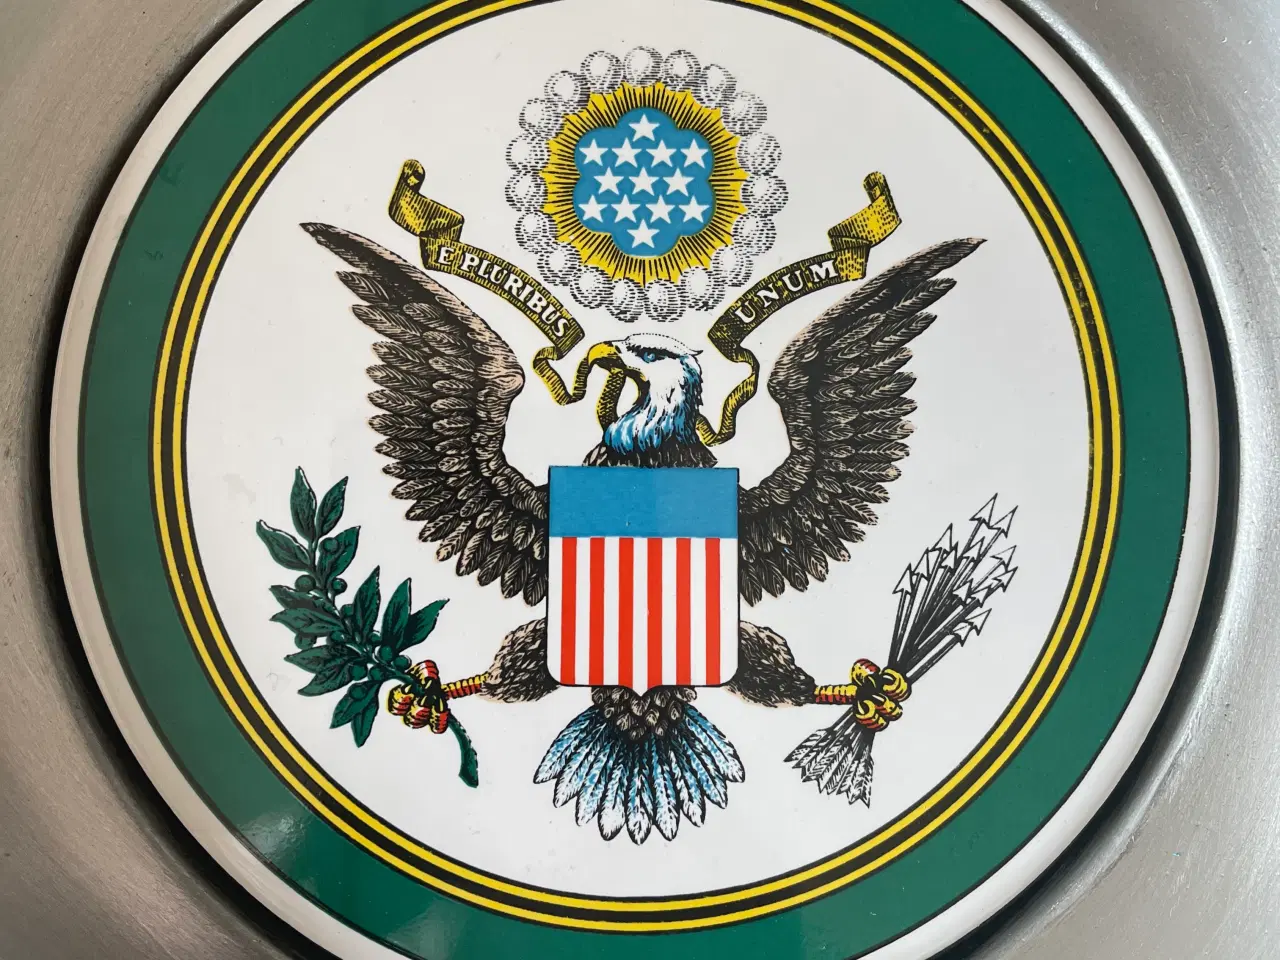 Billede 2 - The Great Seal of the United States of America